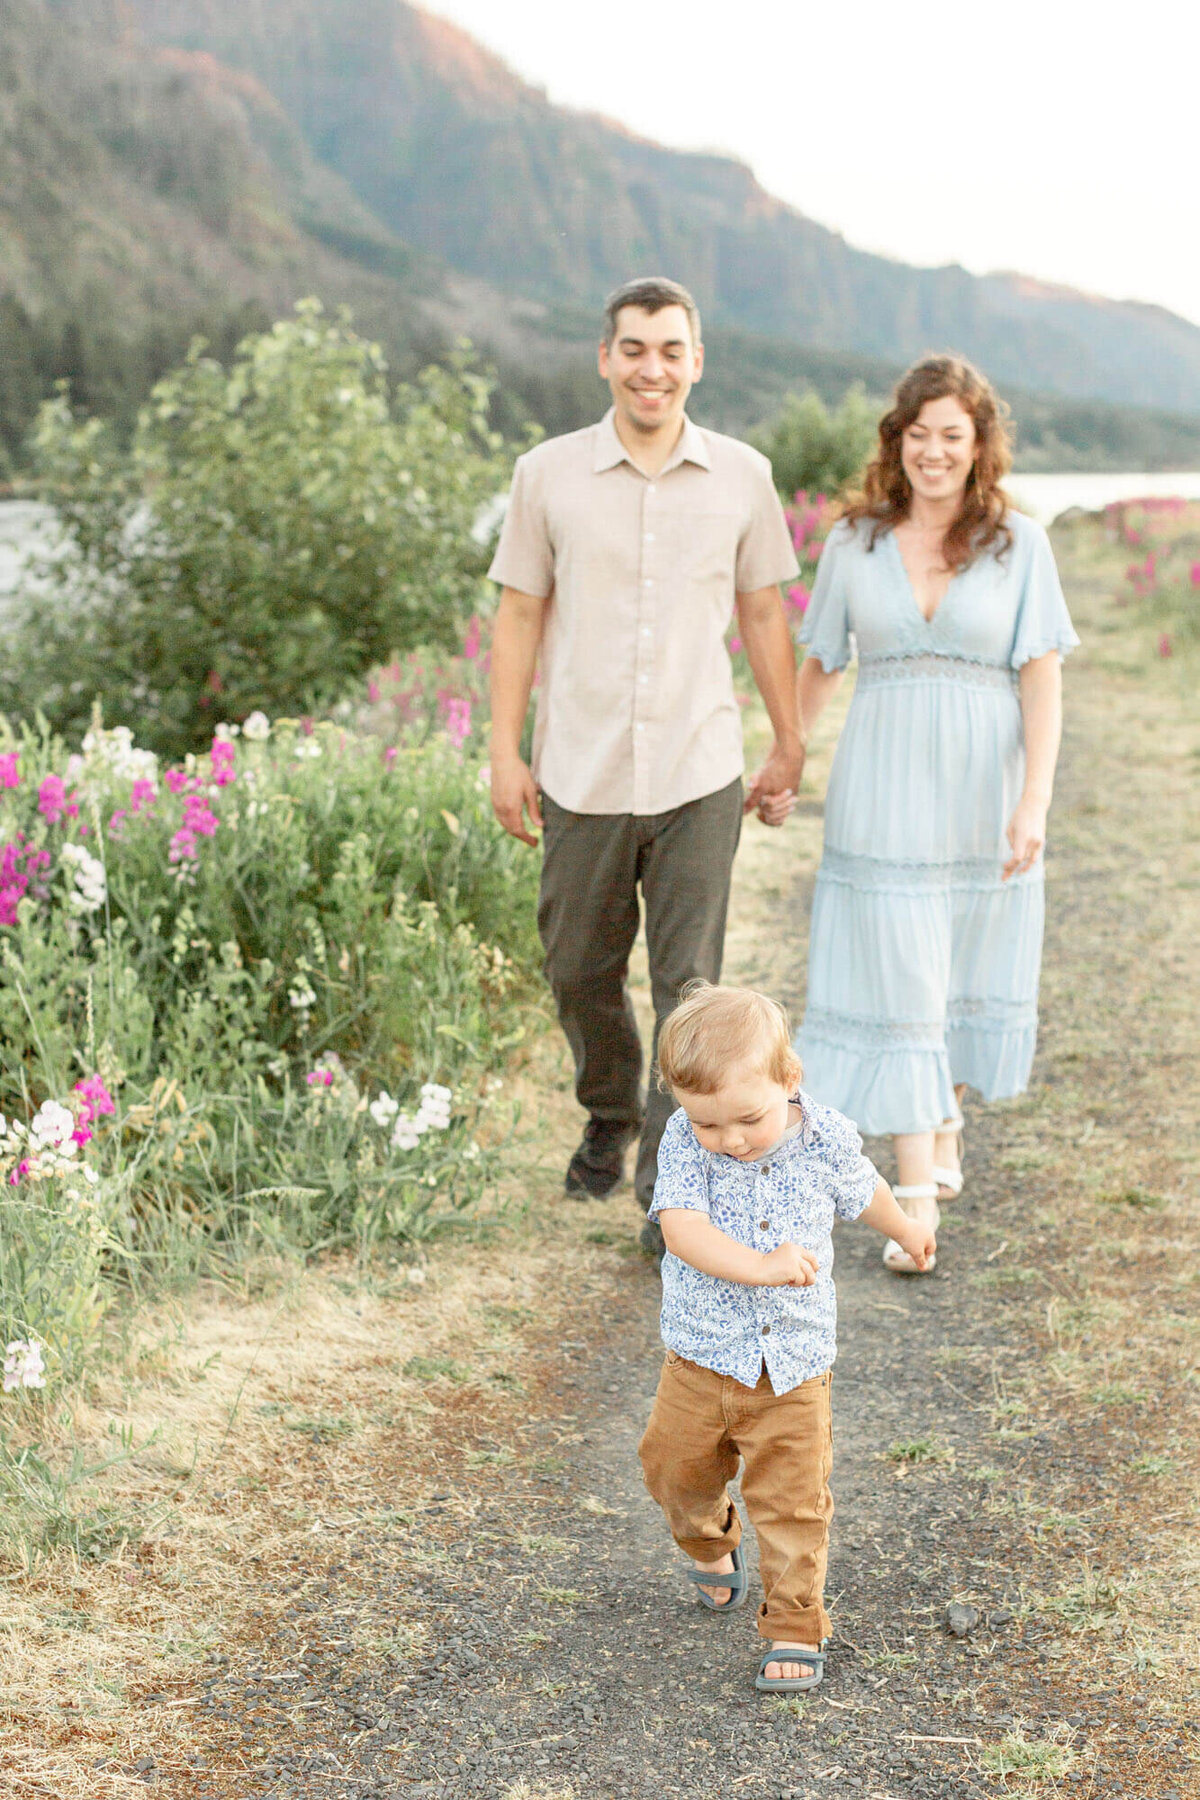 Toddler boy running in front of parents while Mom and Dad hold hands and walk behind him smiling. They are walking next to a patch of pink wildflowers with the river off to the side and the high cliffs of the Columbia River Gorge behind them.